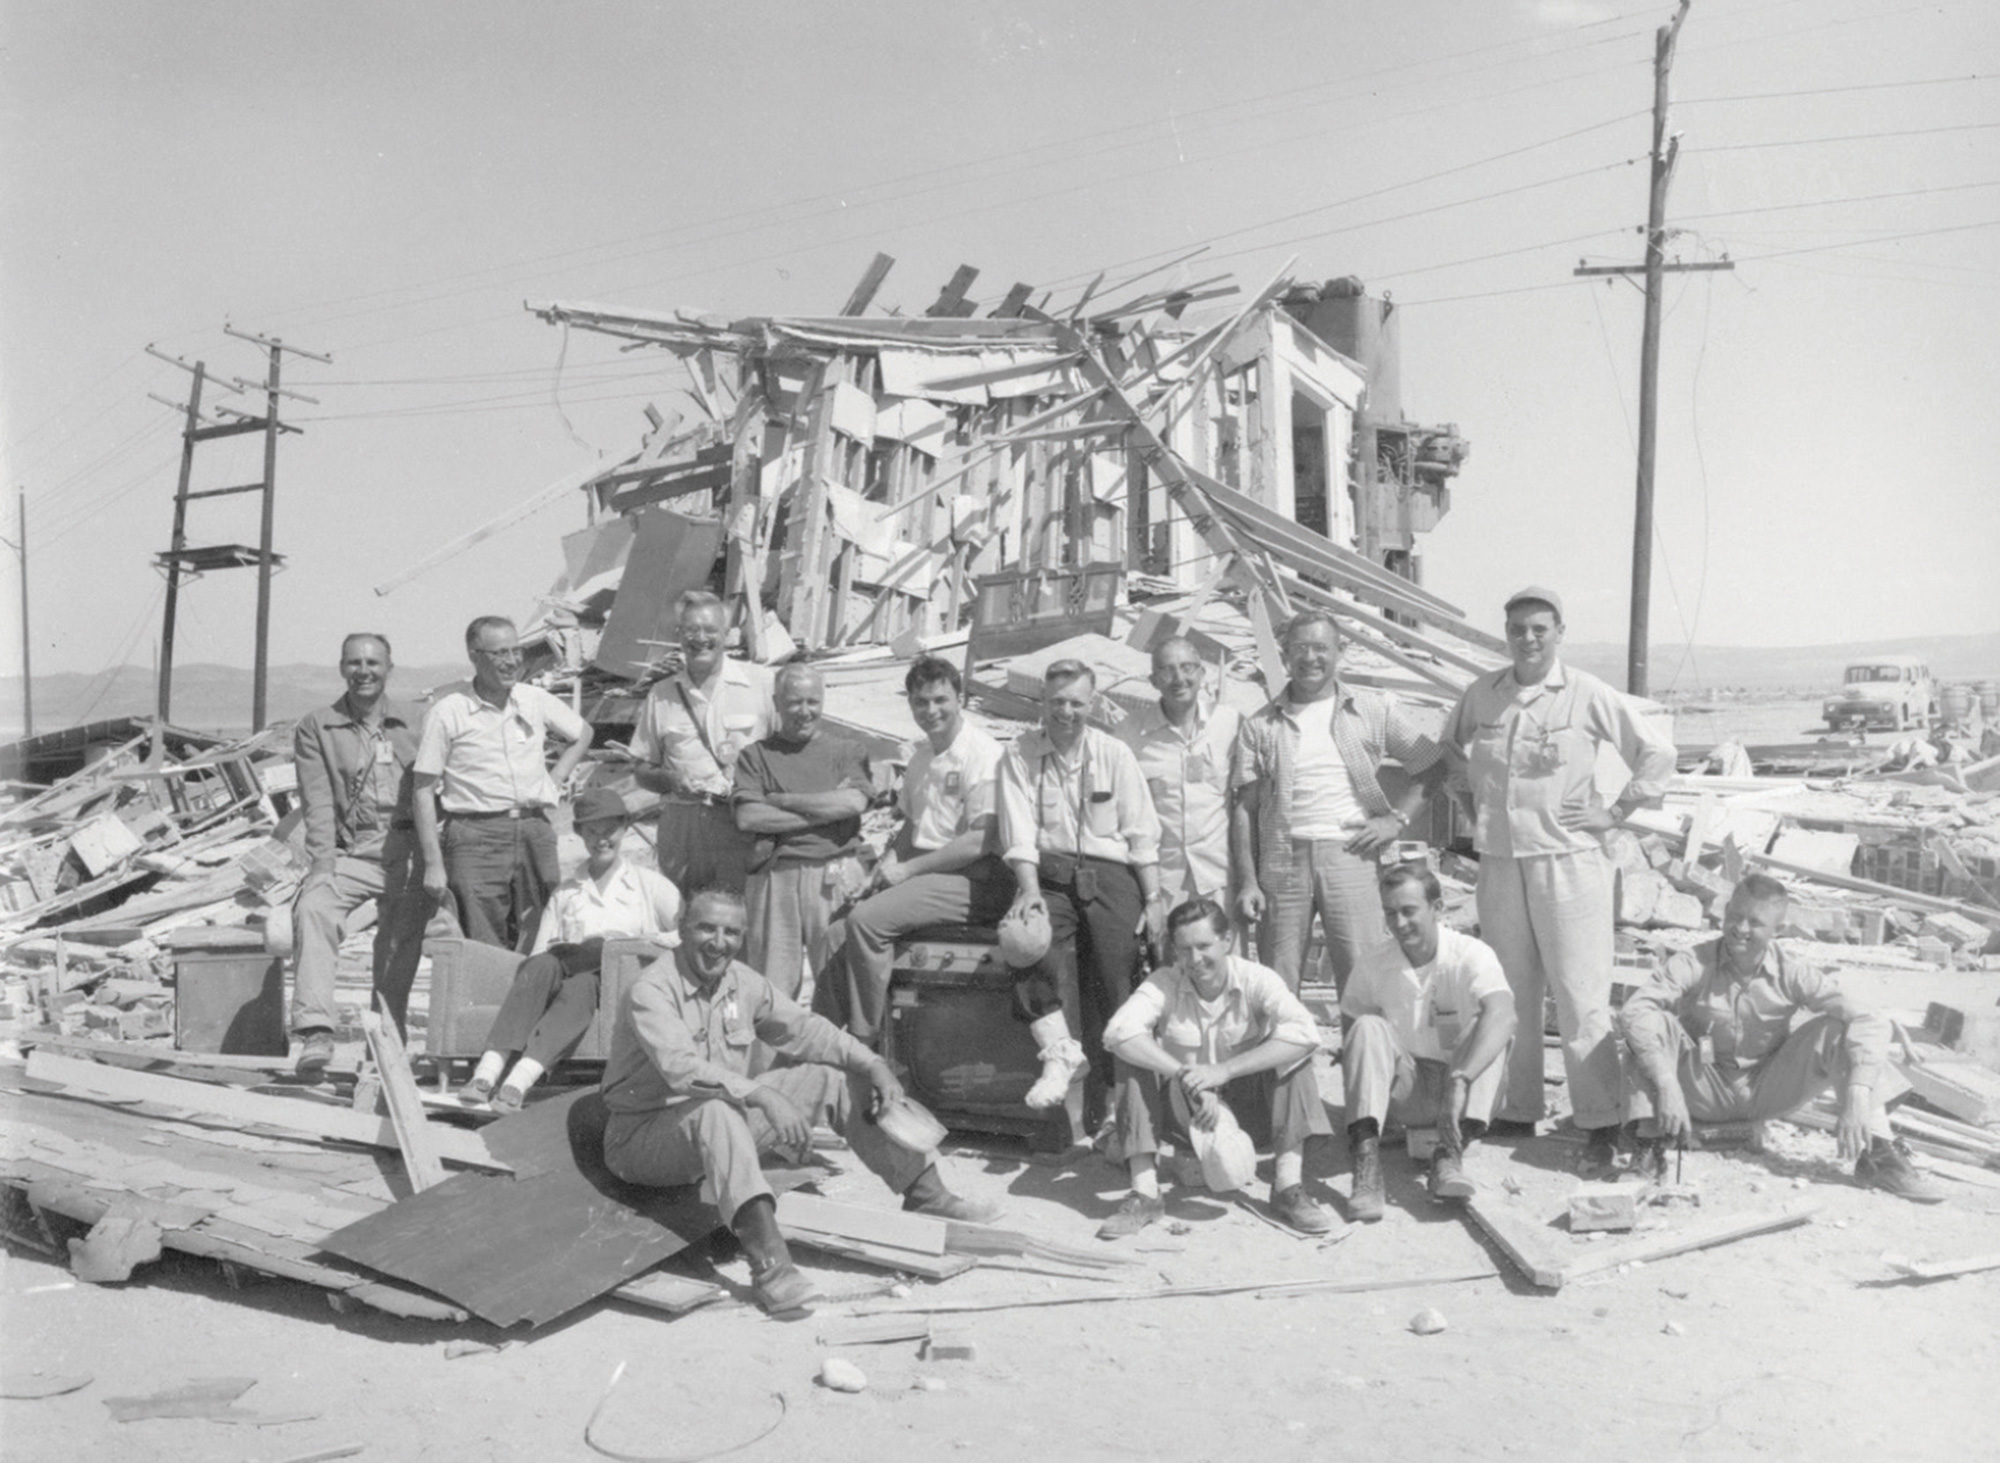 A photograph from Operation Cue depicting workers sitting on the rubble of a house.